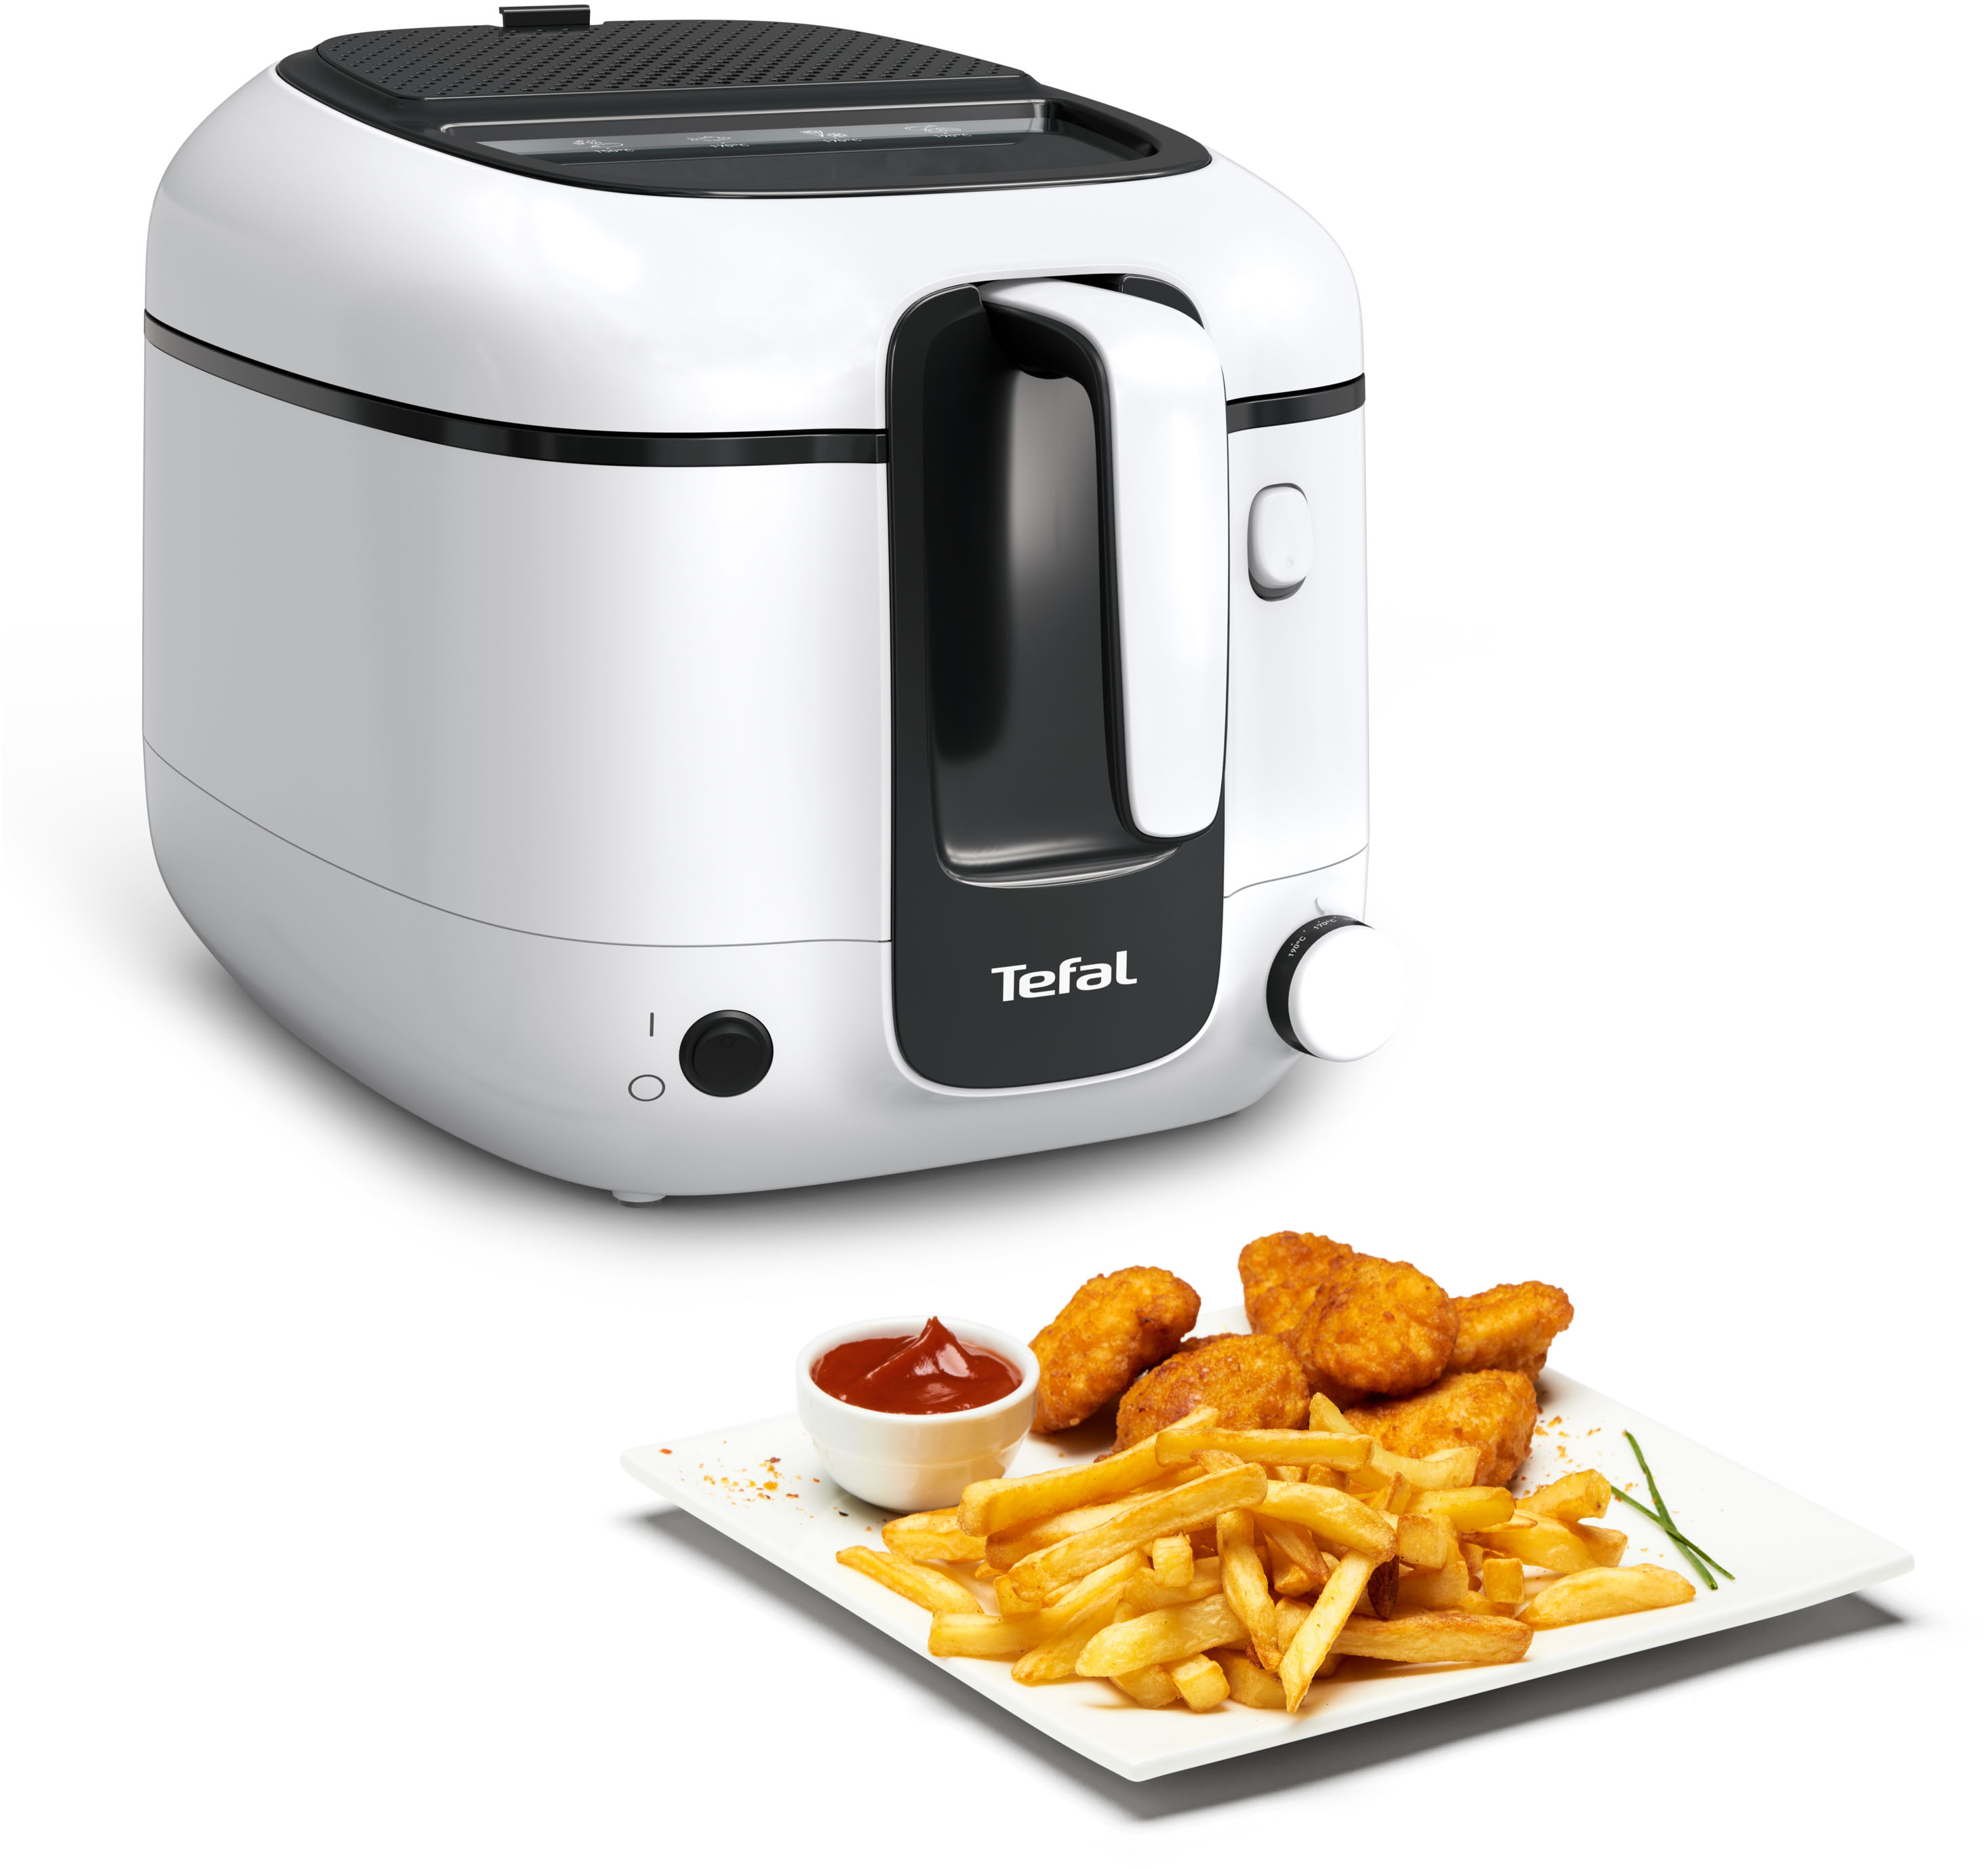 Tefal Fritteuse Super Uno Access FR 3101 ws